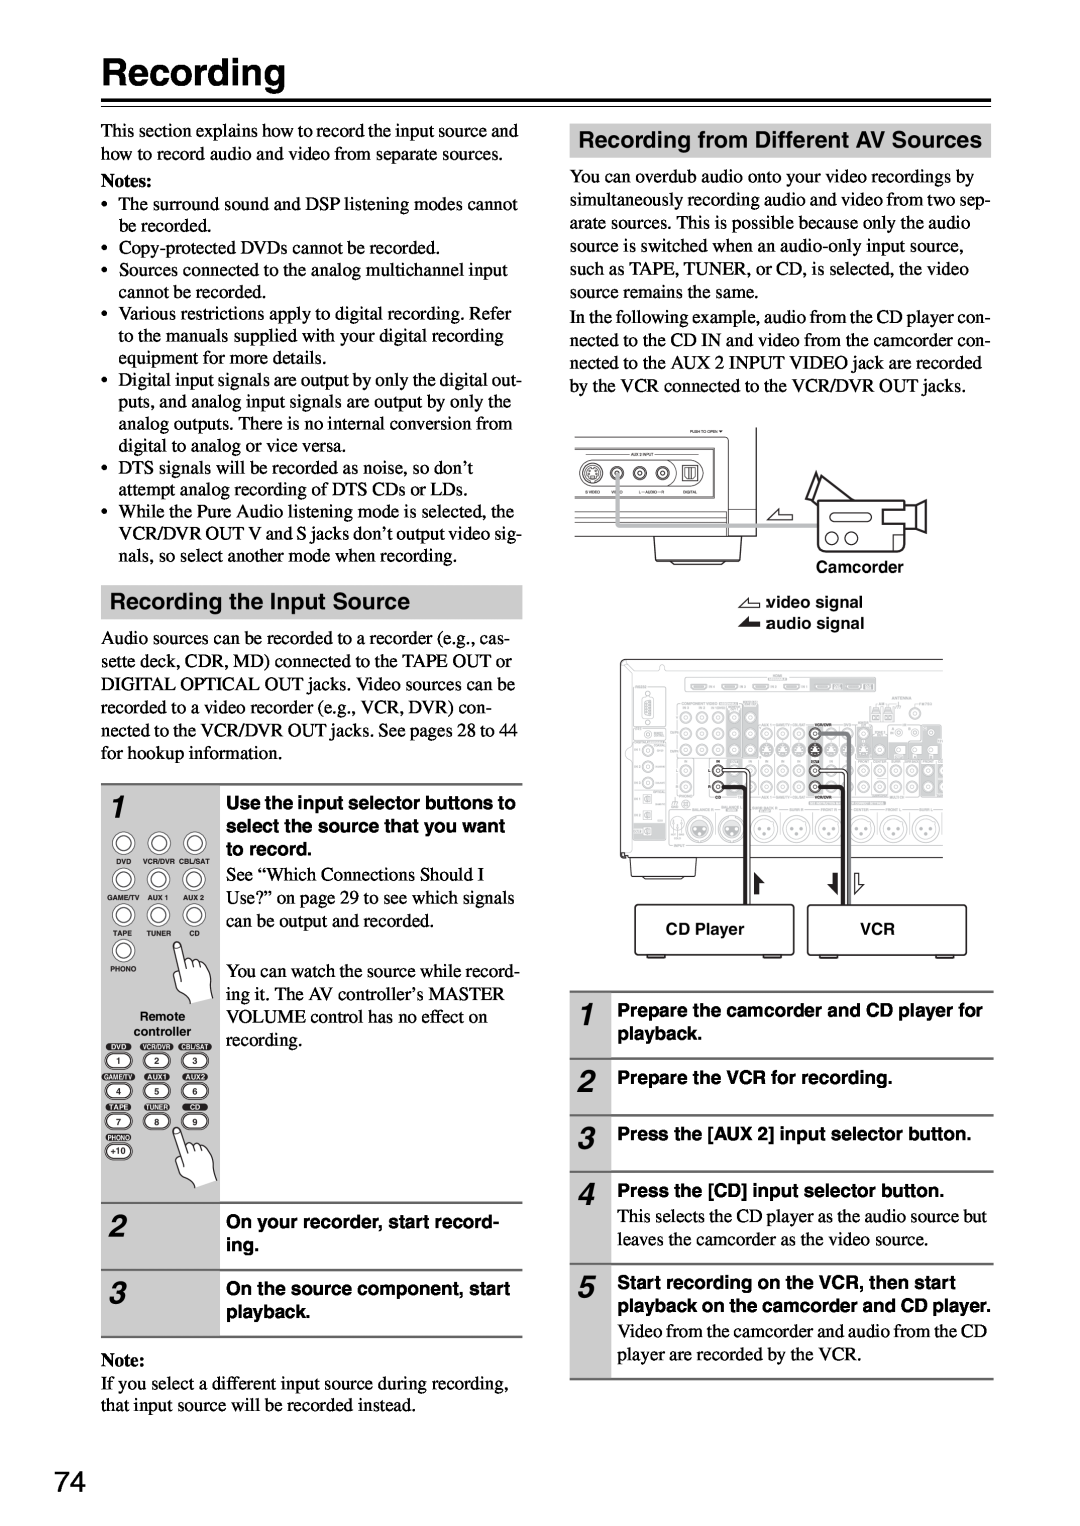 Onkyo PR-SC886 instruction manual Recording the Input Source, Recording from Different AV Sources, Notes 